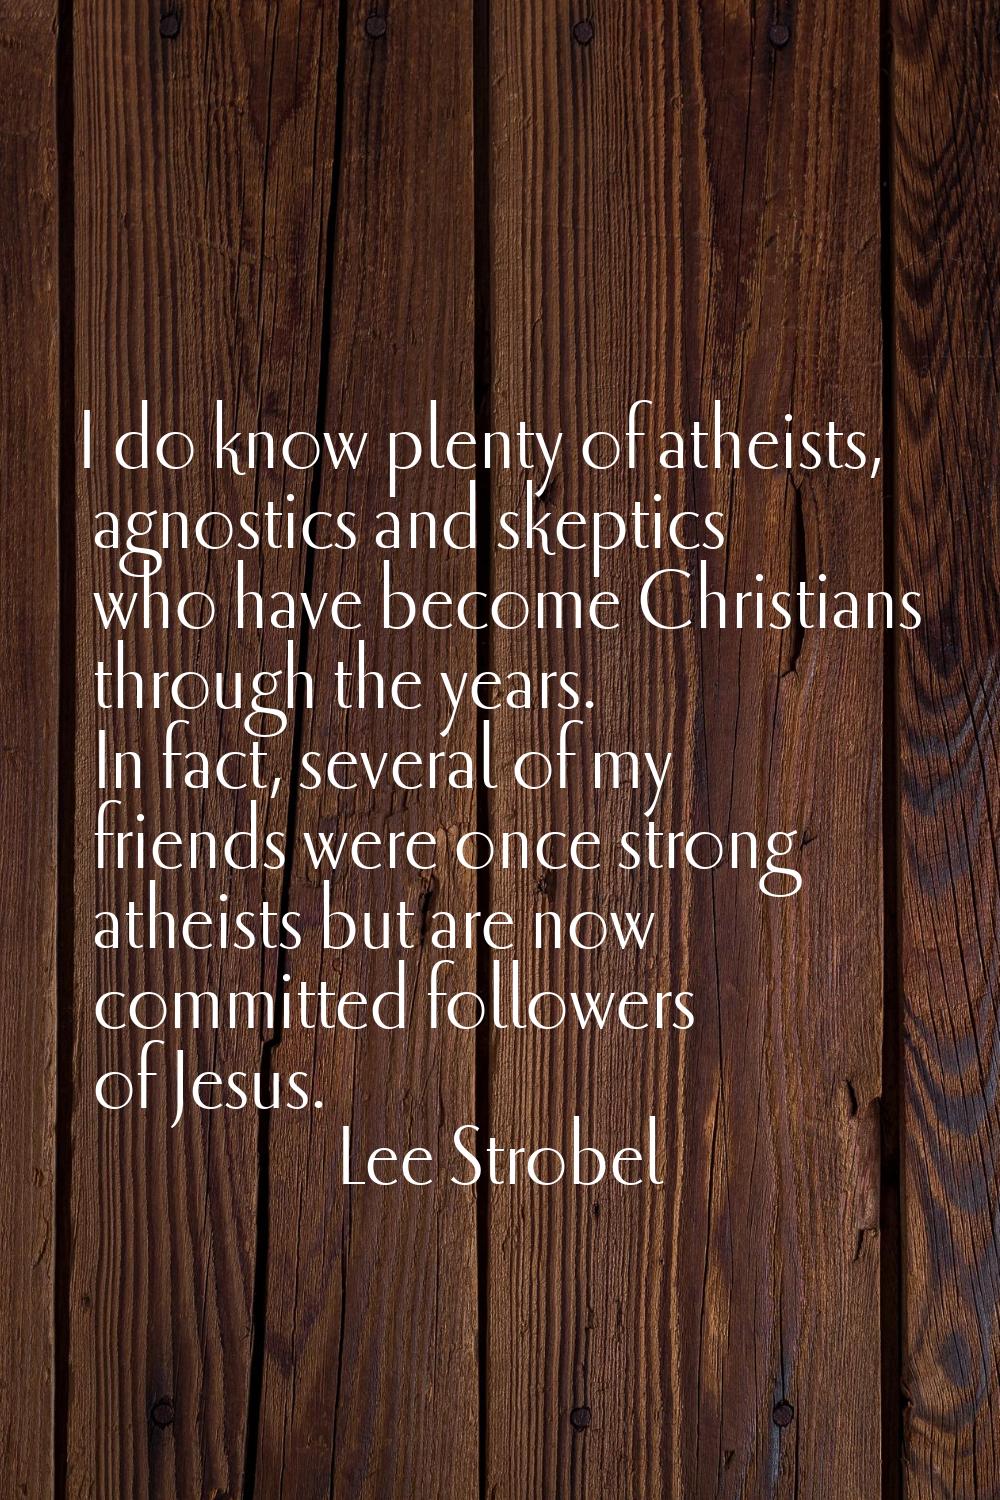 I do know plenty of atheists, agnostics and skeptics who have become Christians through the years. 